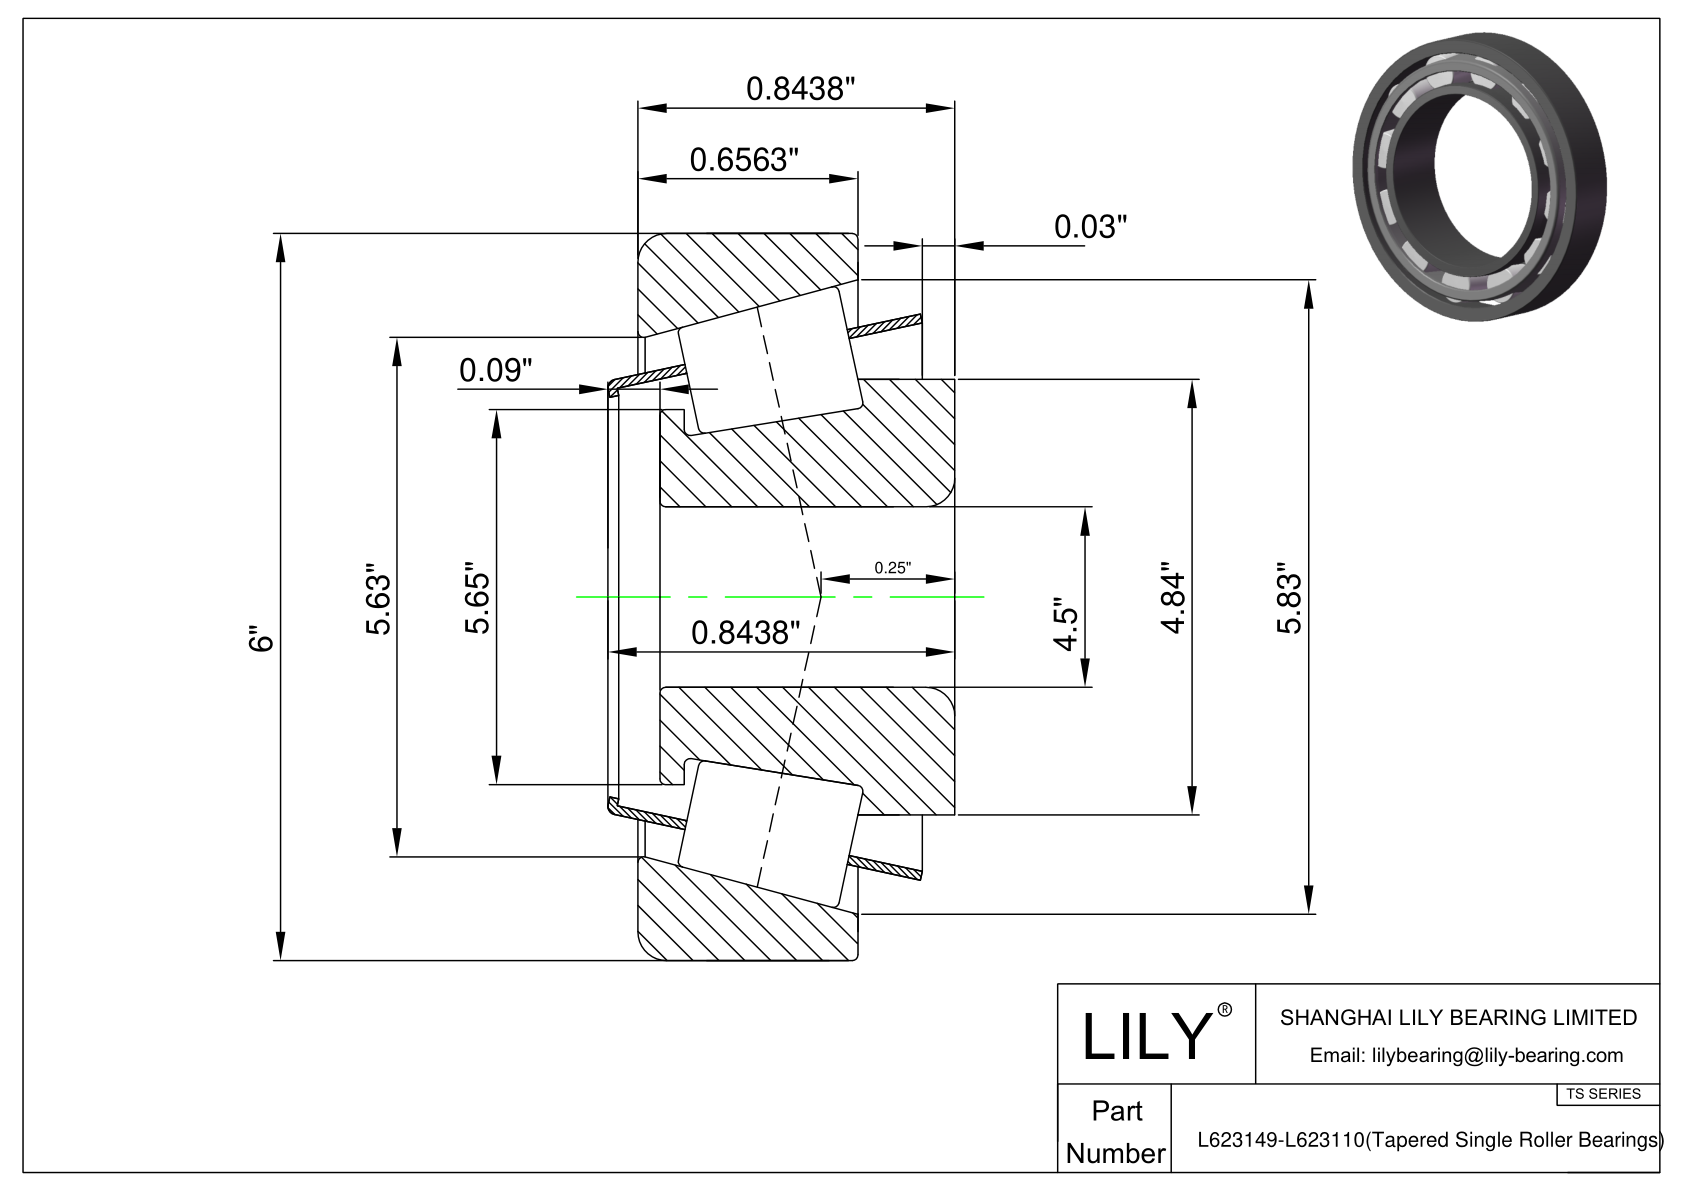 L623149-L623110 TS (Tapered Single Roller Bearings) (Imperial) cad drawing